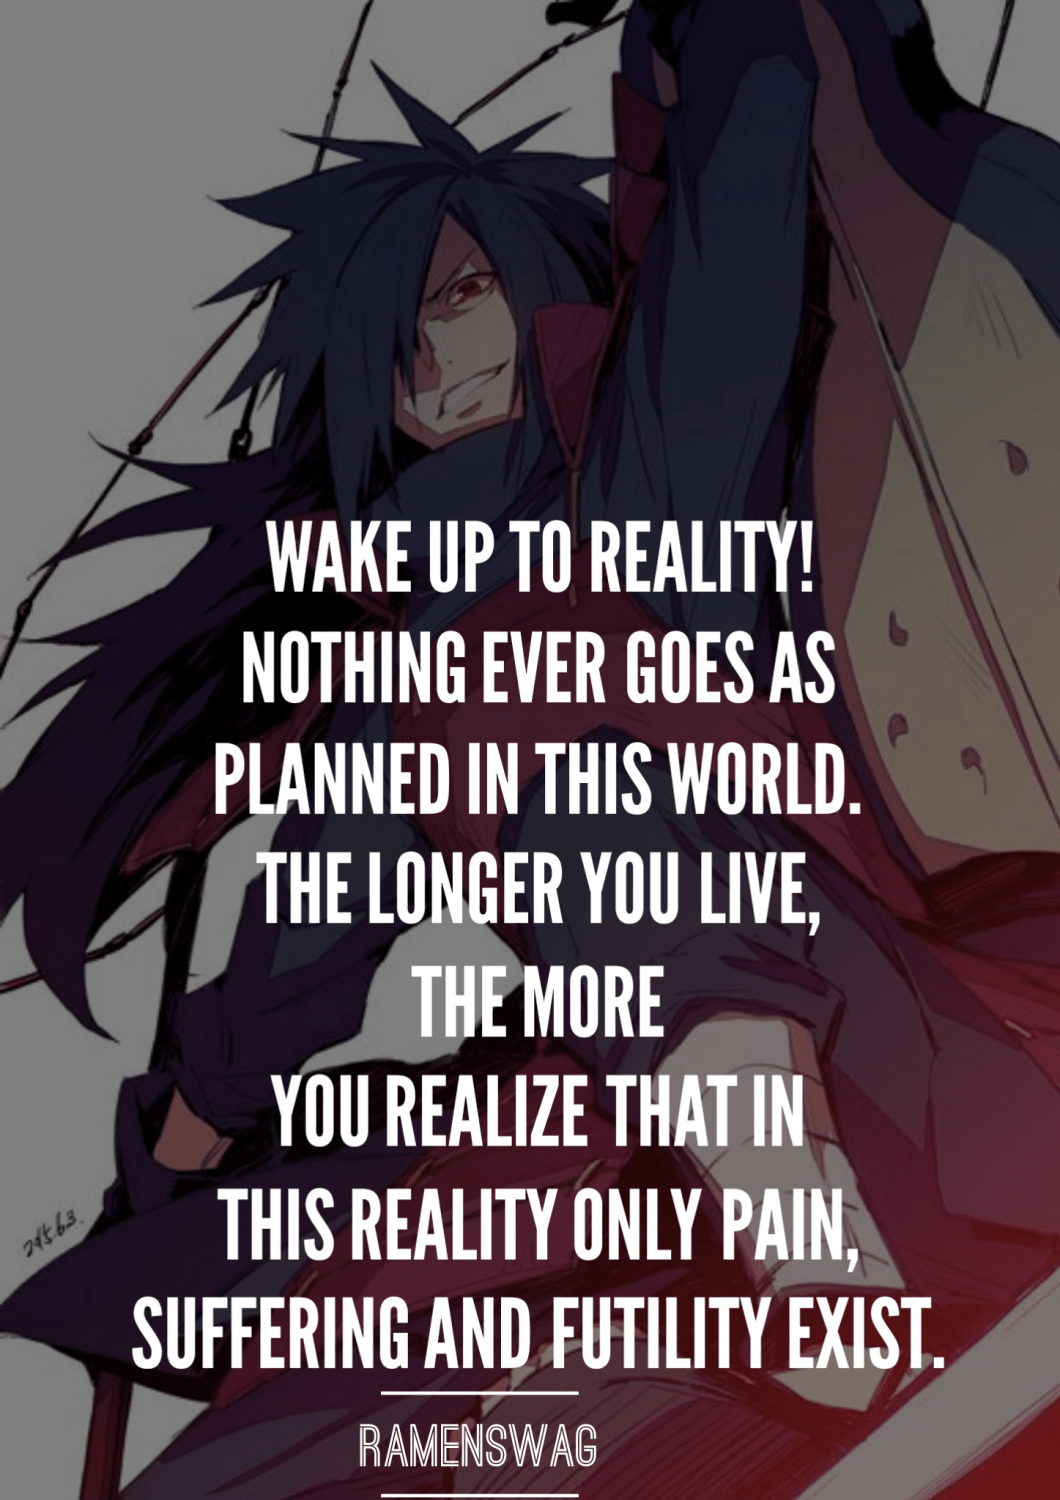 Uchiha Madara Quotes About Love and Life Absolutely Worth Sharing!